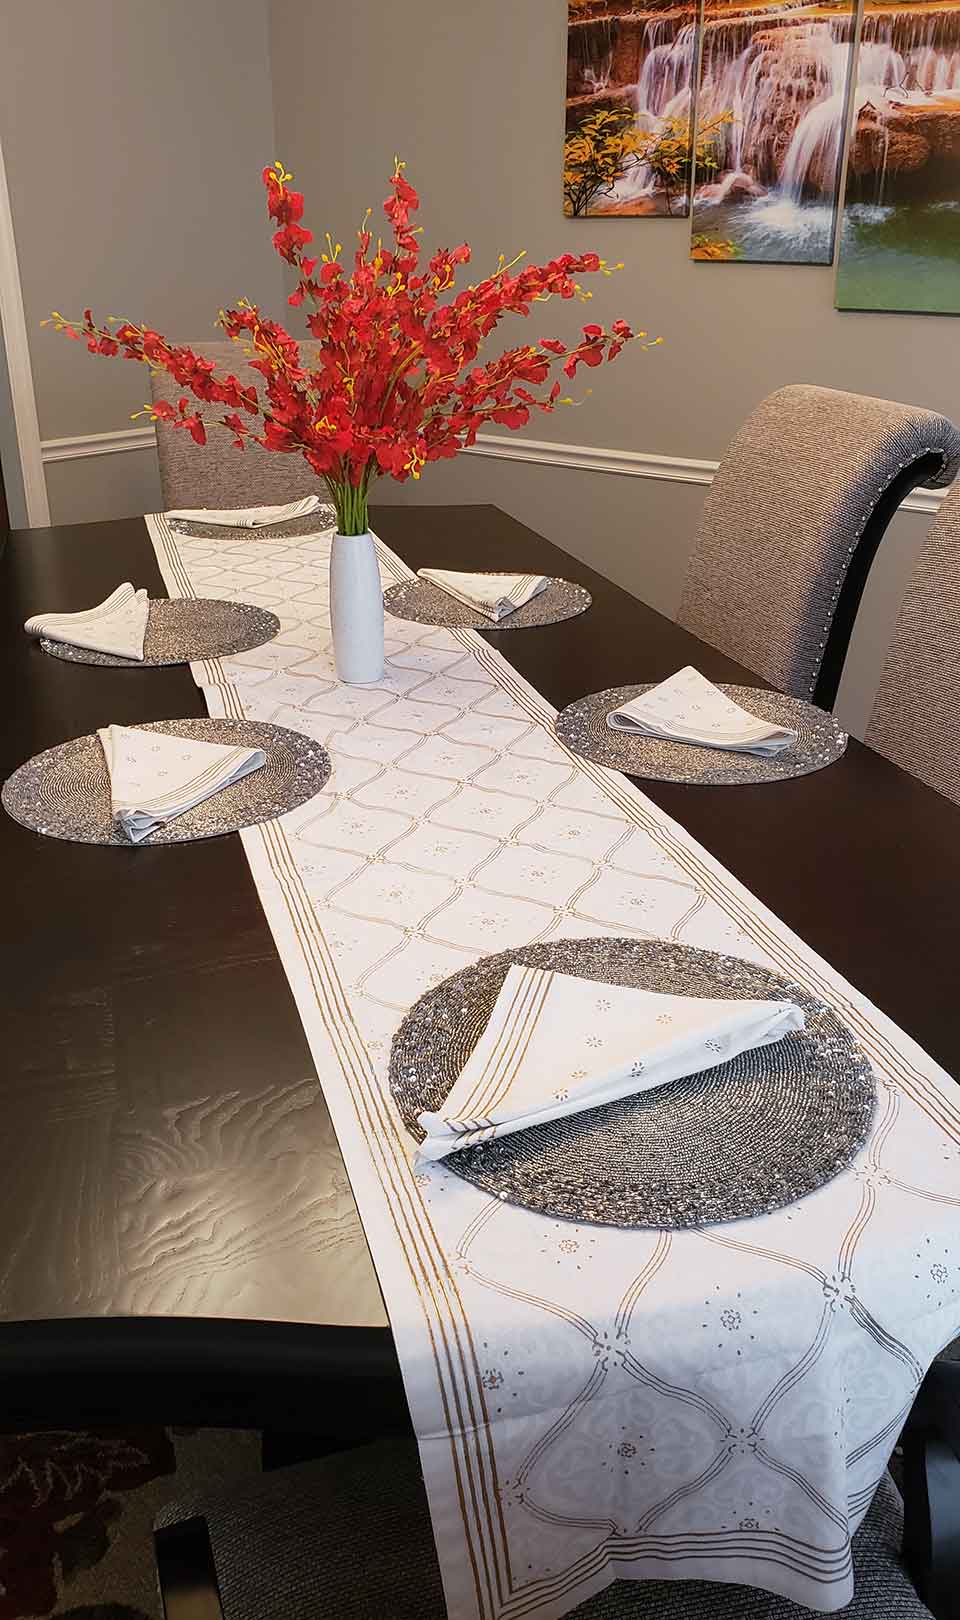 Round Dining Table Runner Ideas : Table Runners For Round Tables: Find ...